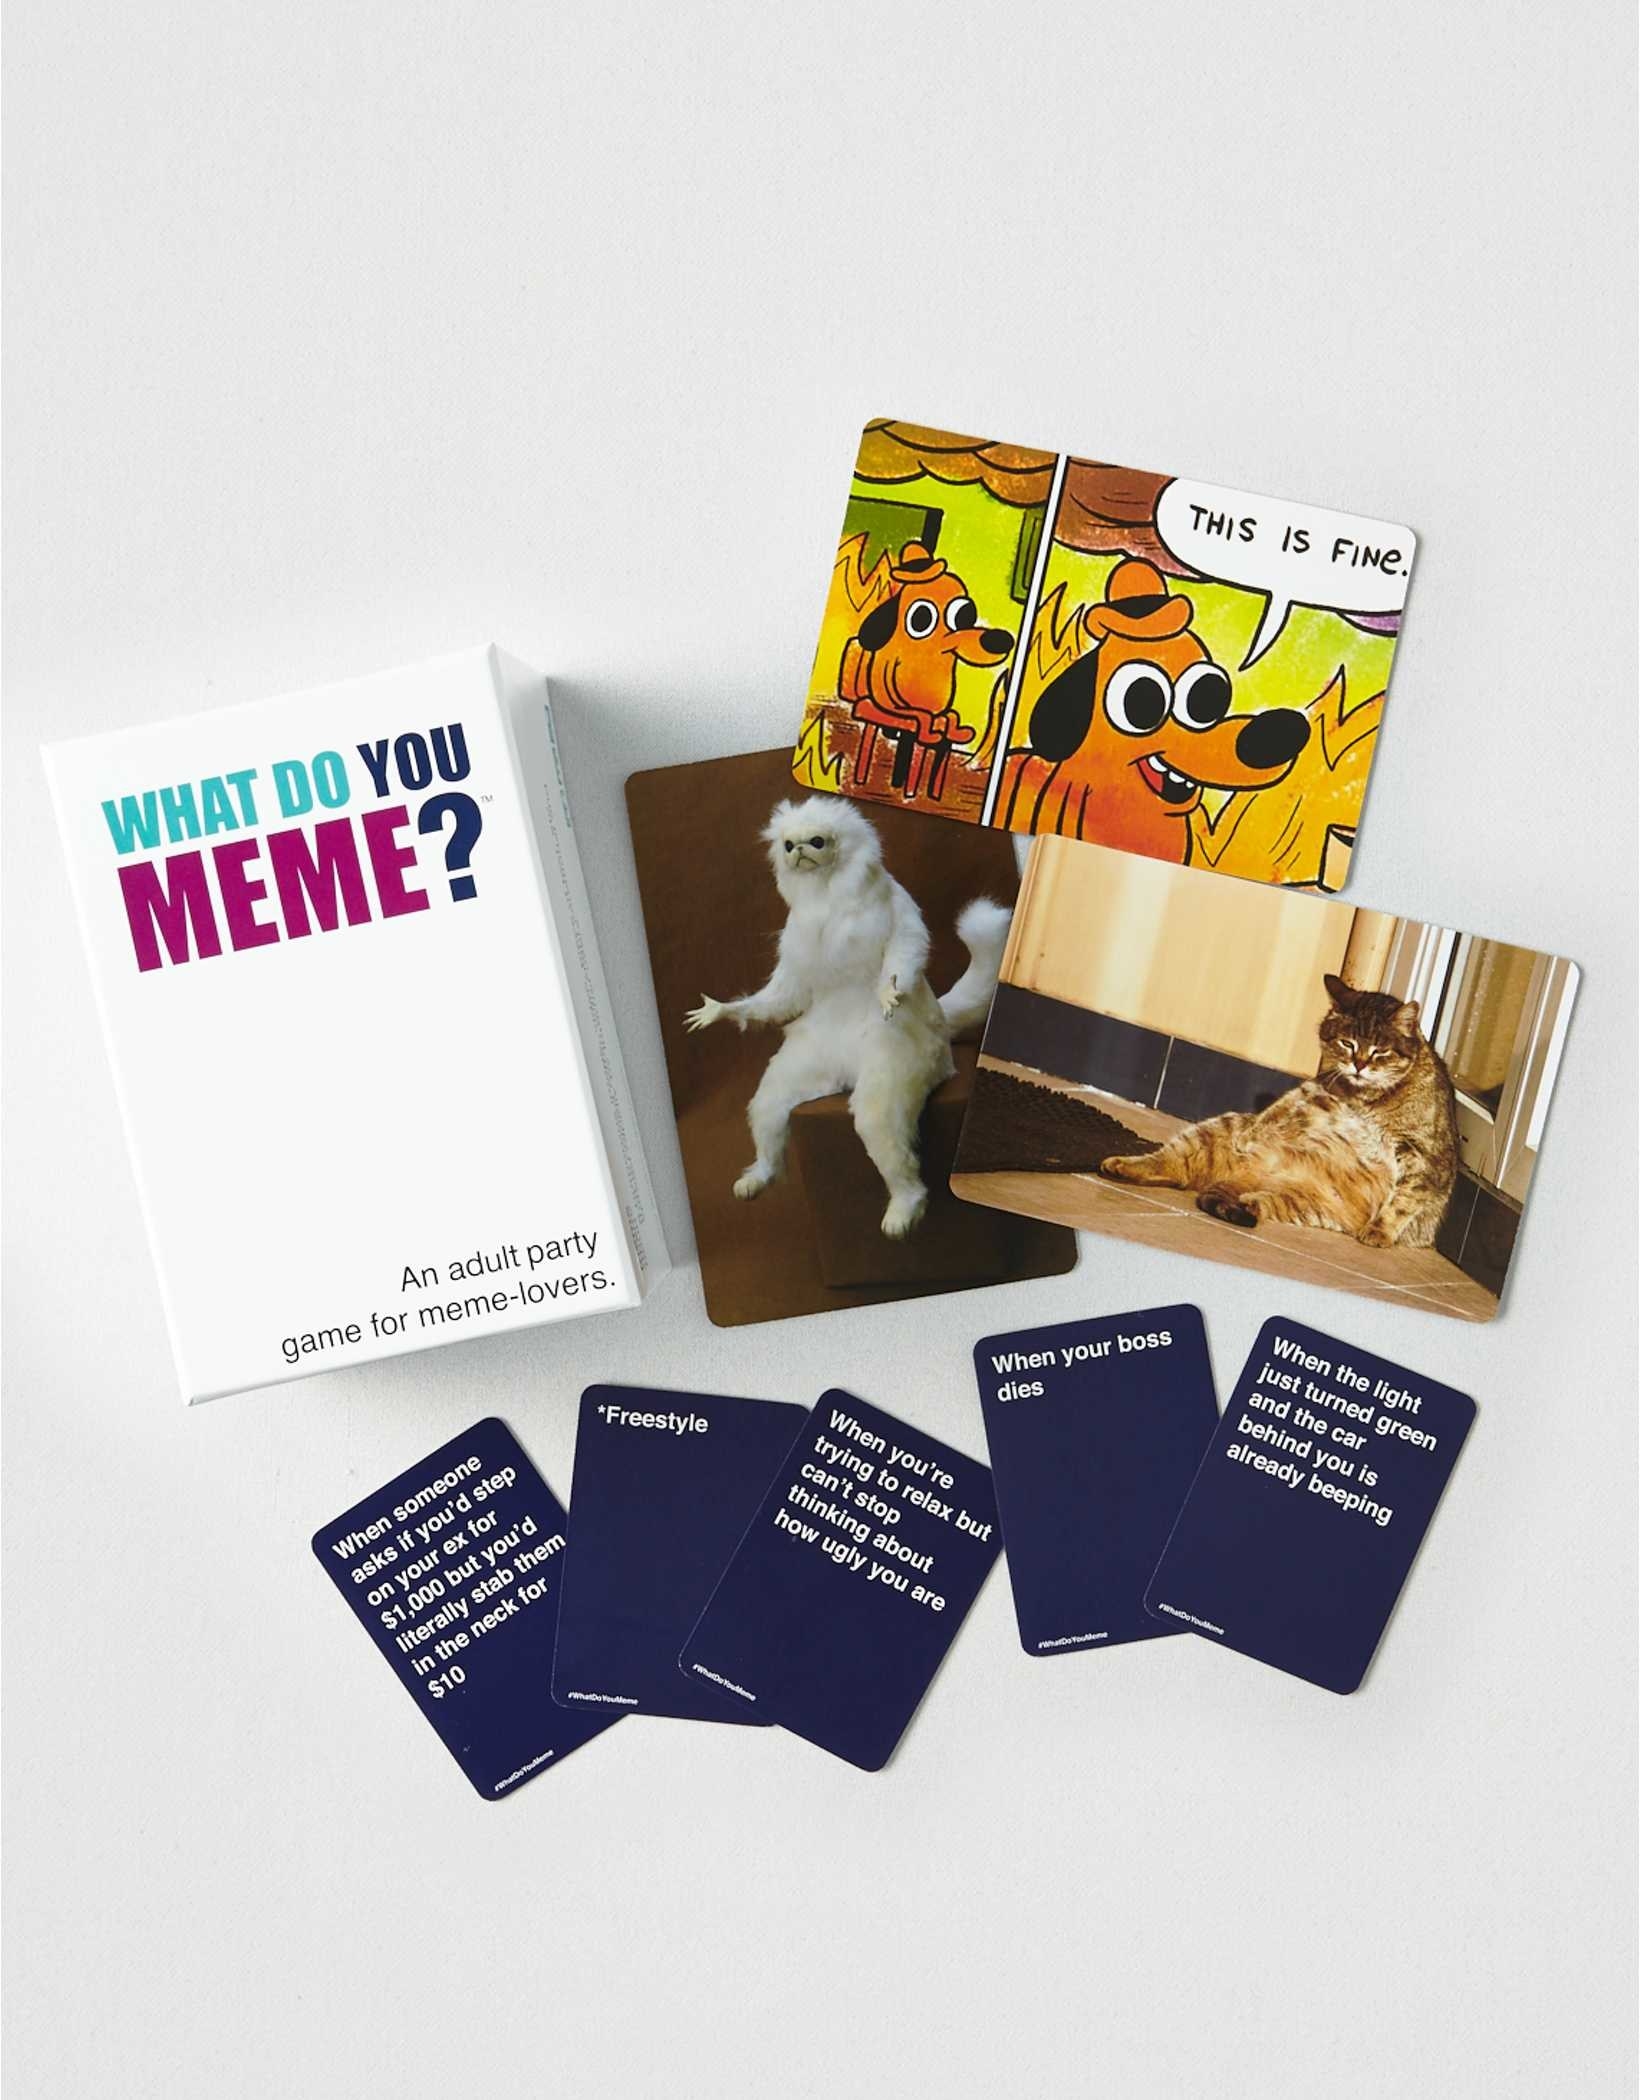 The game showing three memes and an assortment of caption cards